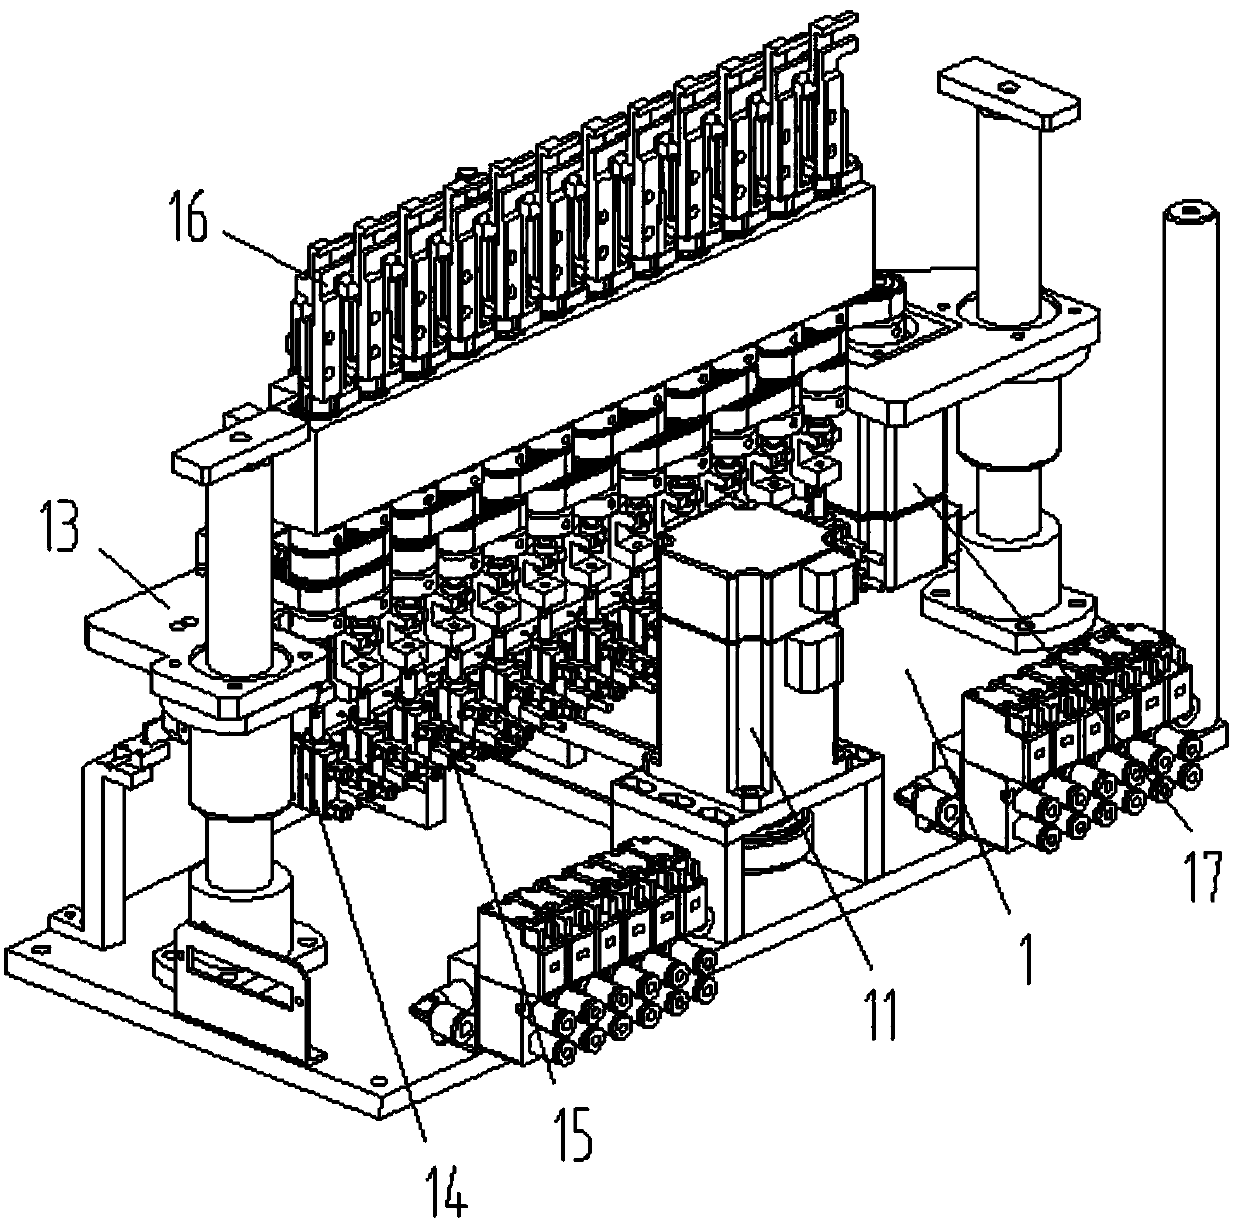 An Inductance Automatic Feeding and Winding Machine